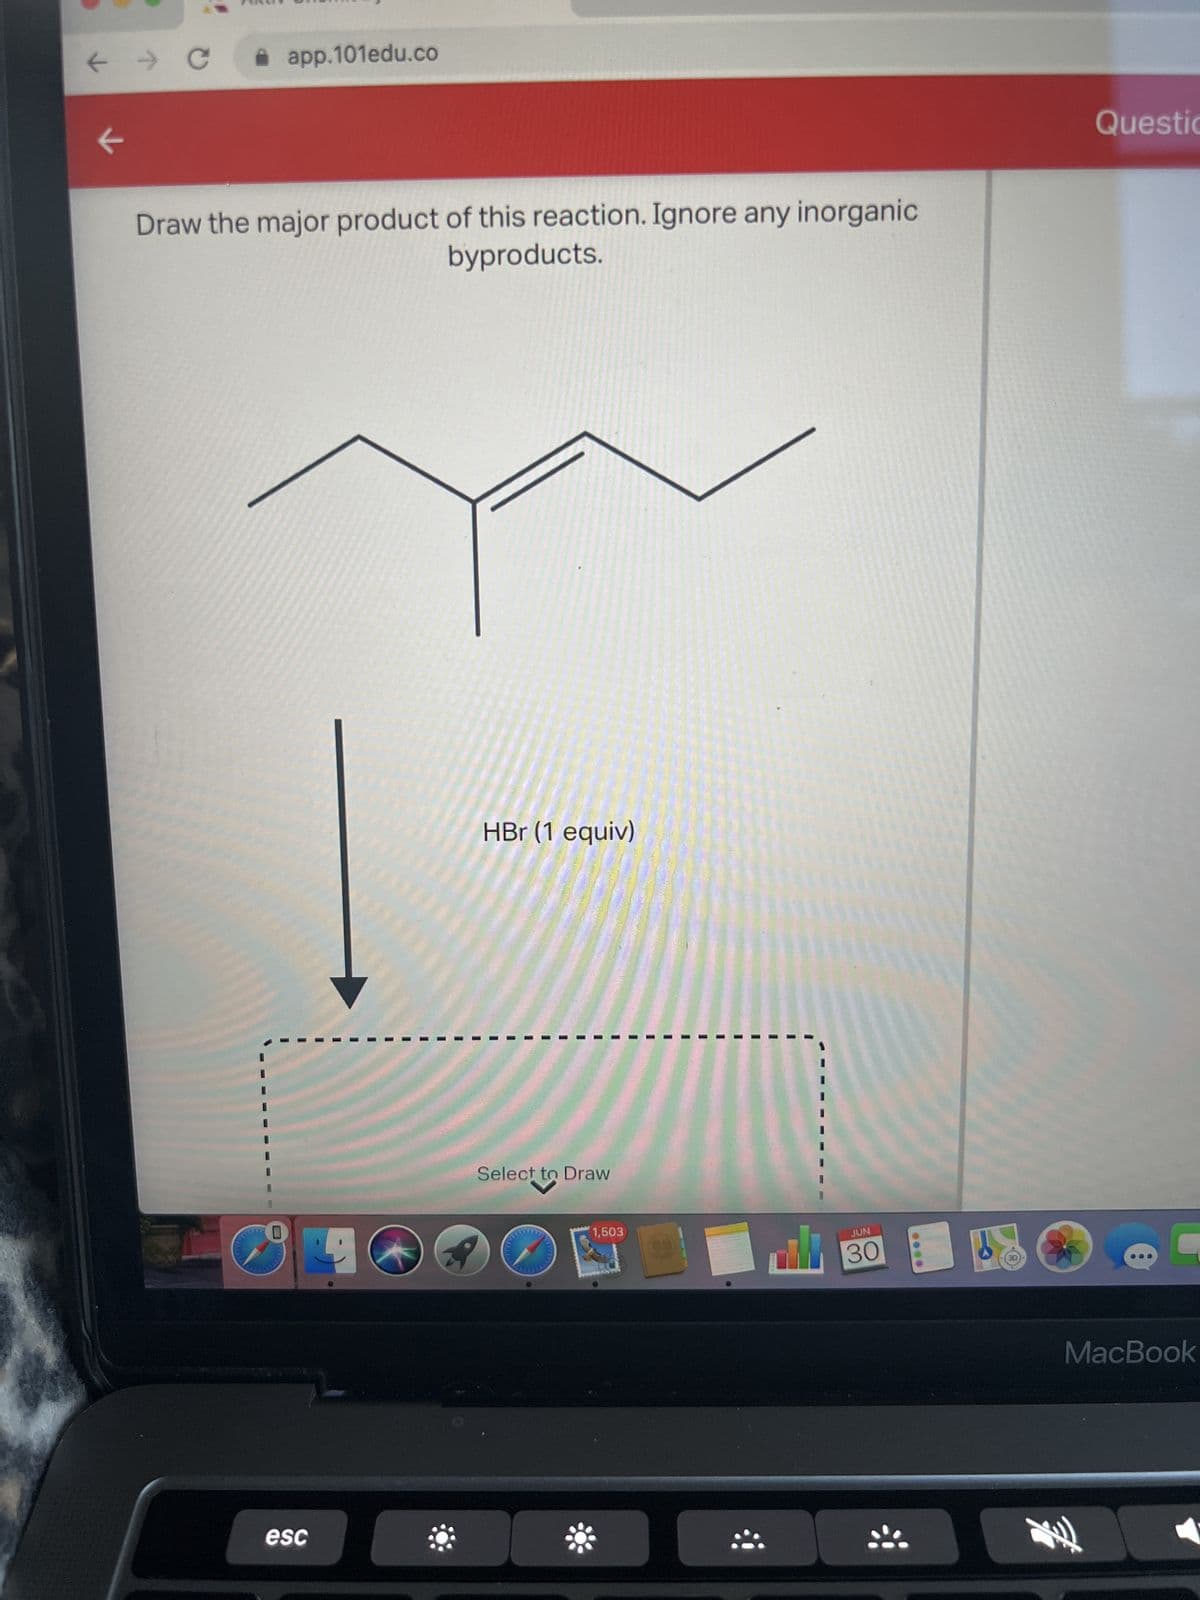 ← → C
k
✰ app.101edu.co
Draw the major product of this reaction. Ignore any inorganic
byproducts.
wh
0
esc
HBr (1 equiv)
Sel
Select to Draw
1,503
C
JUN
30
0000
**
Questic
MacBook